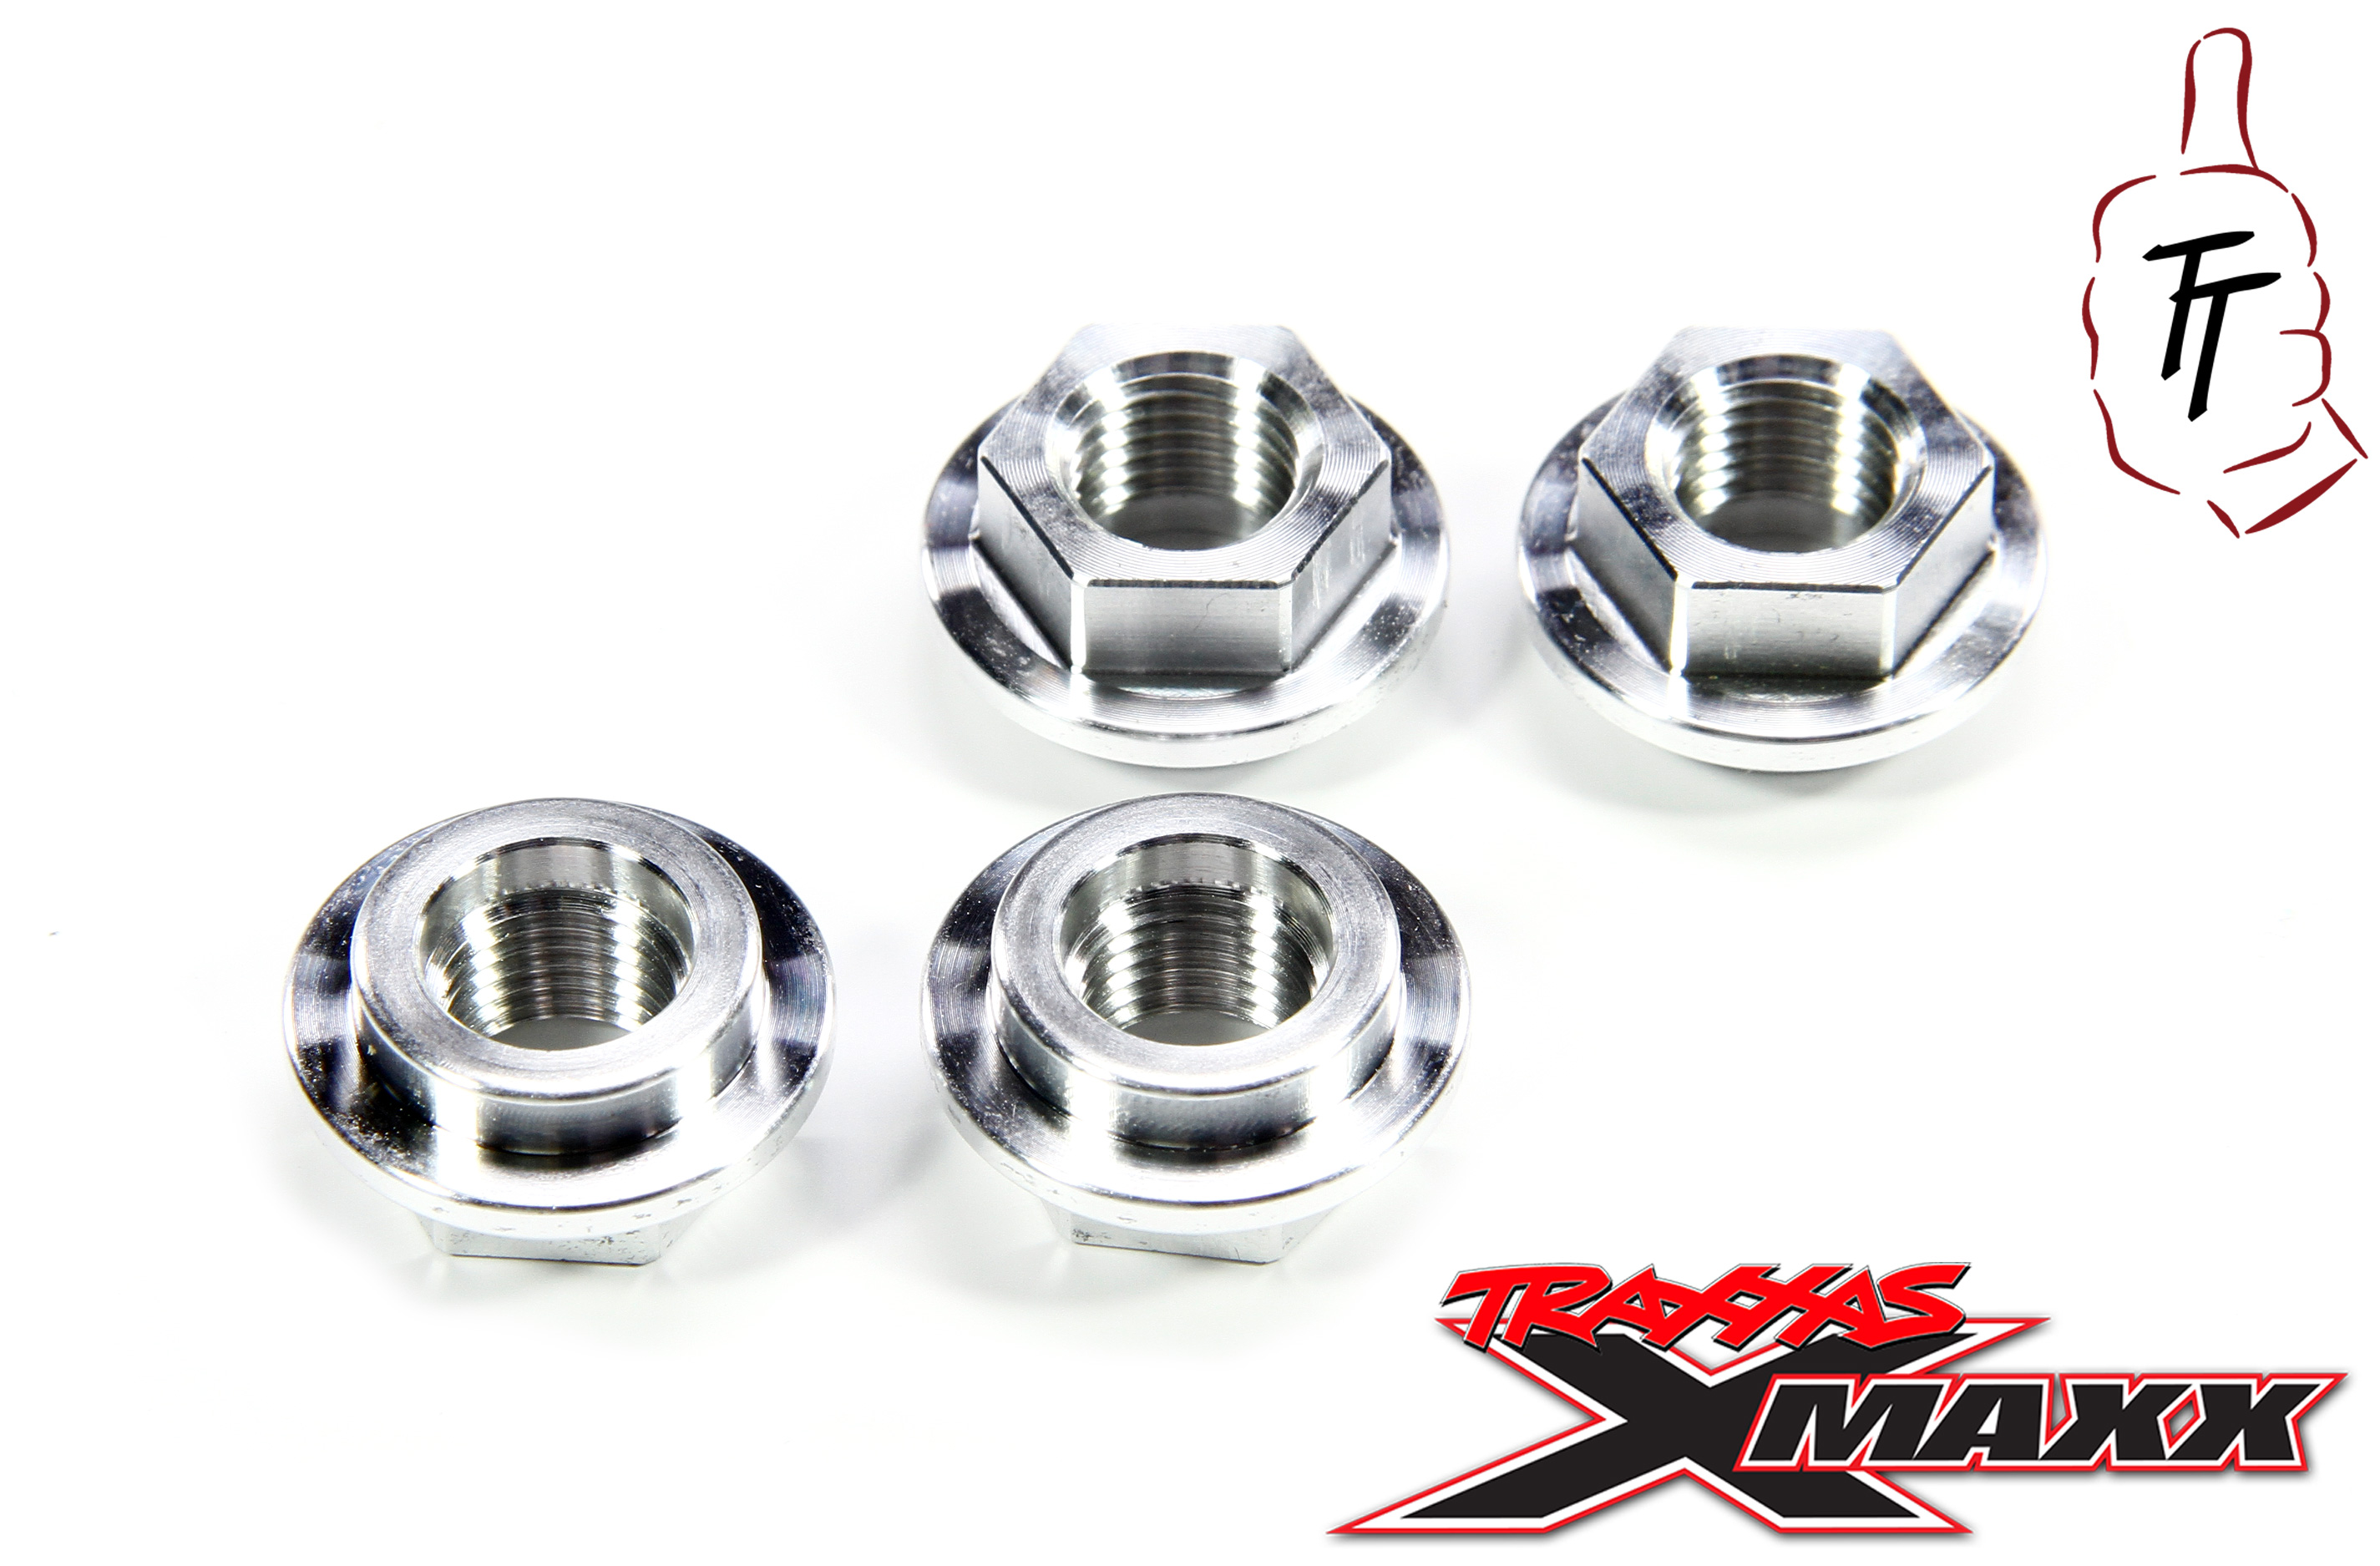 TT1020 Top Tuning Adapter wheel nut for MadMax, HPI and Losi 5ive rims on Traxxas X-MAXX